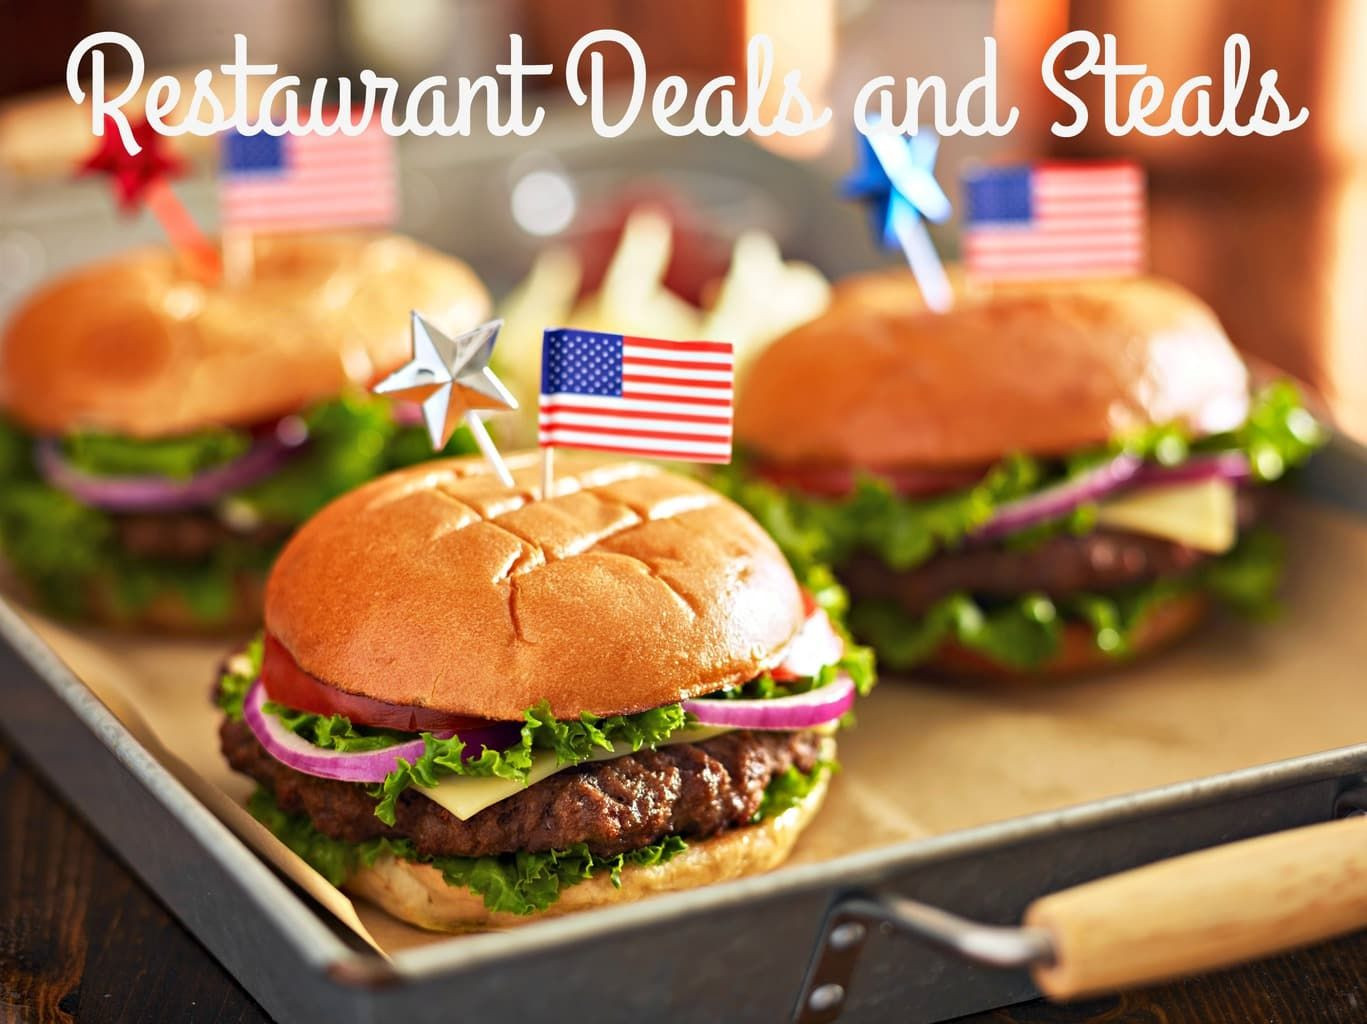 4th Of July Food Deals
 4th of July – Restaurant Deals and Steals